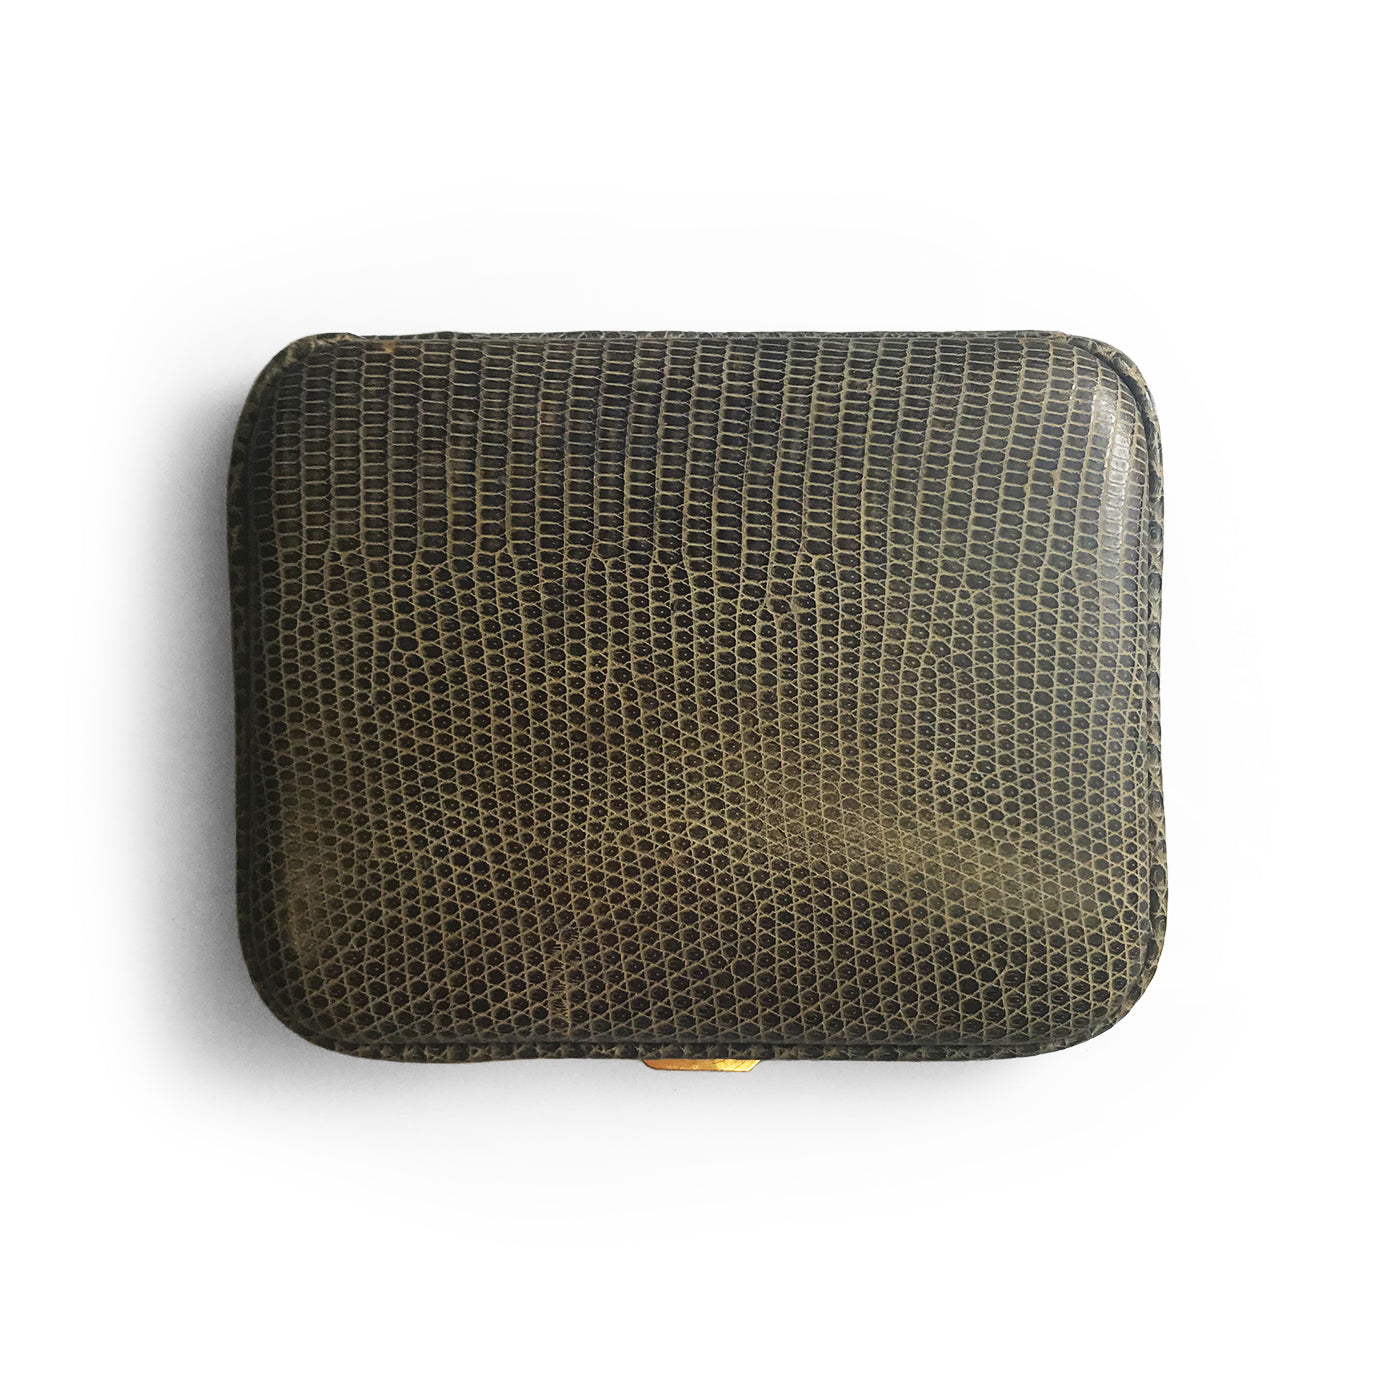 Vintage Lizard Skin compact, the perfect size for any stylish handbag - SHOP NOW - www.intovintage.co.uk